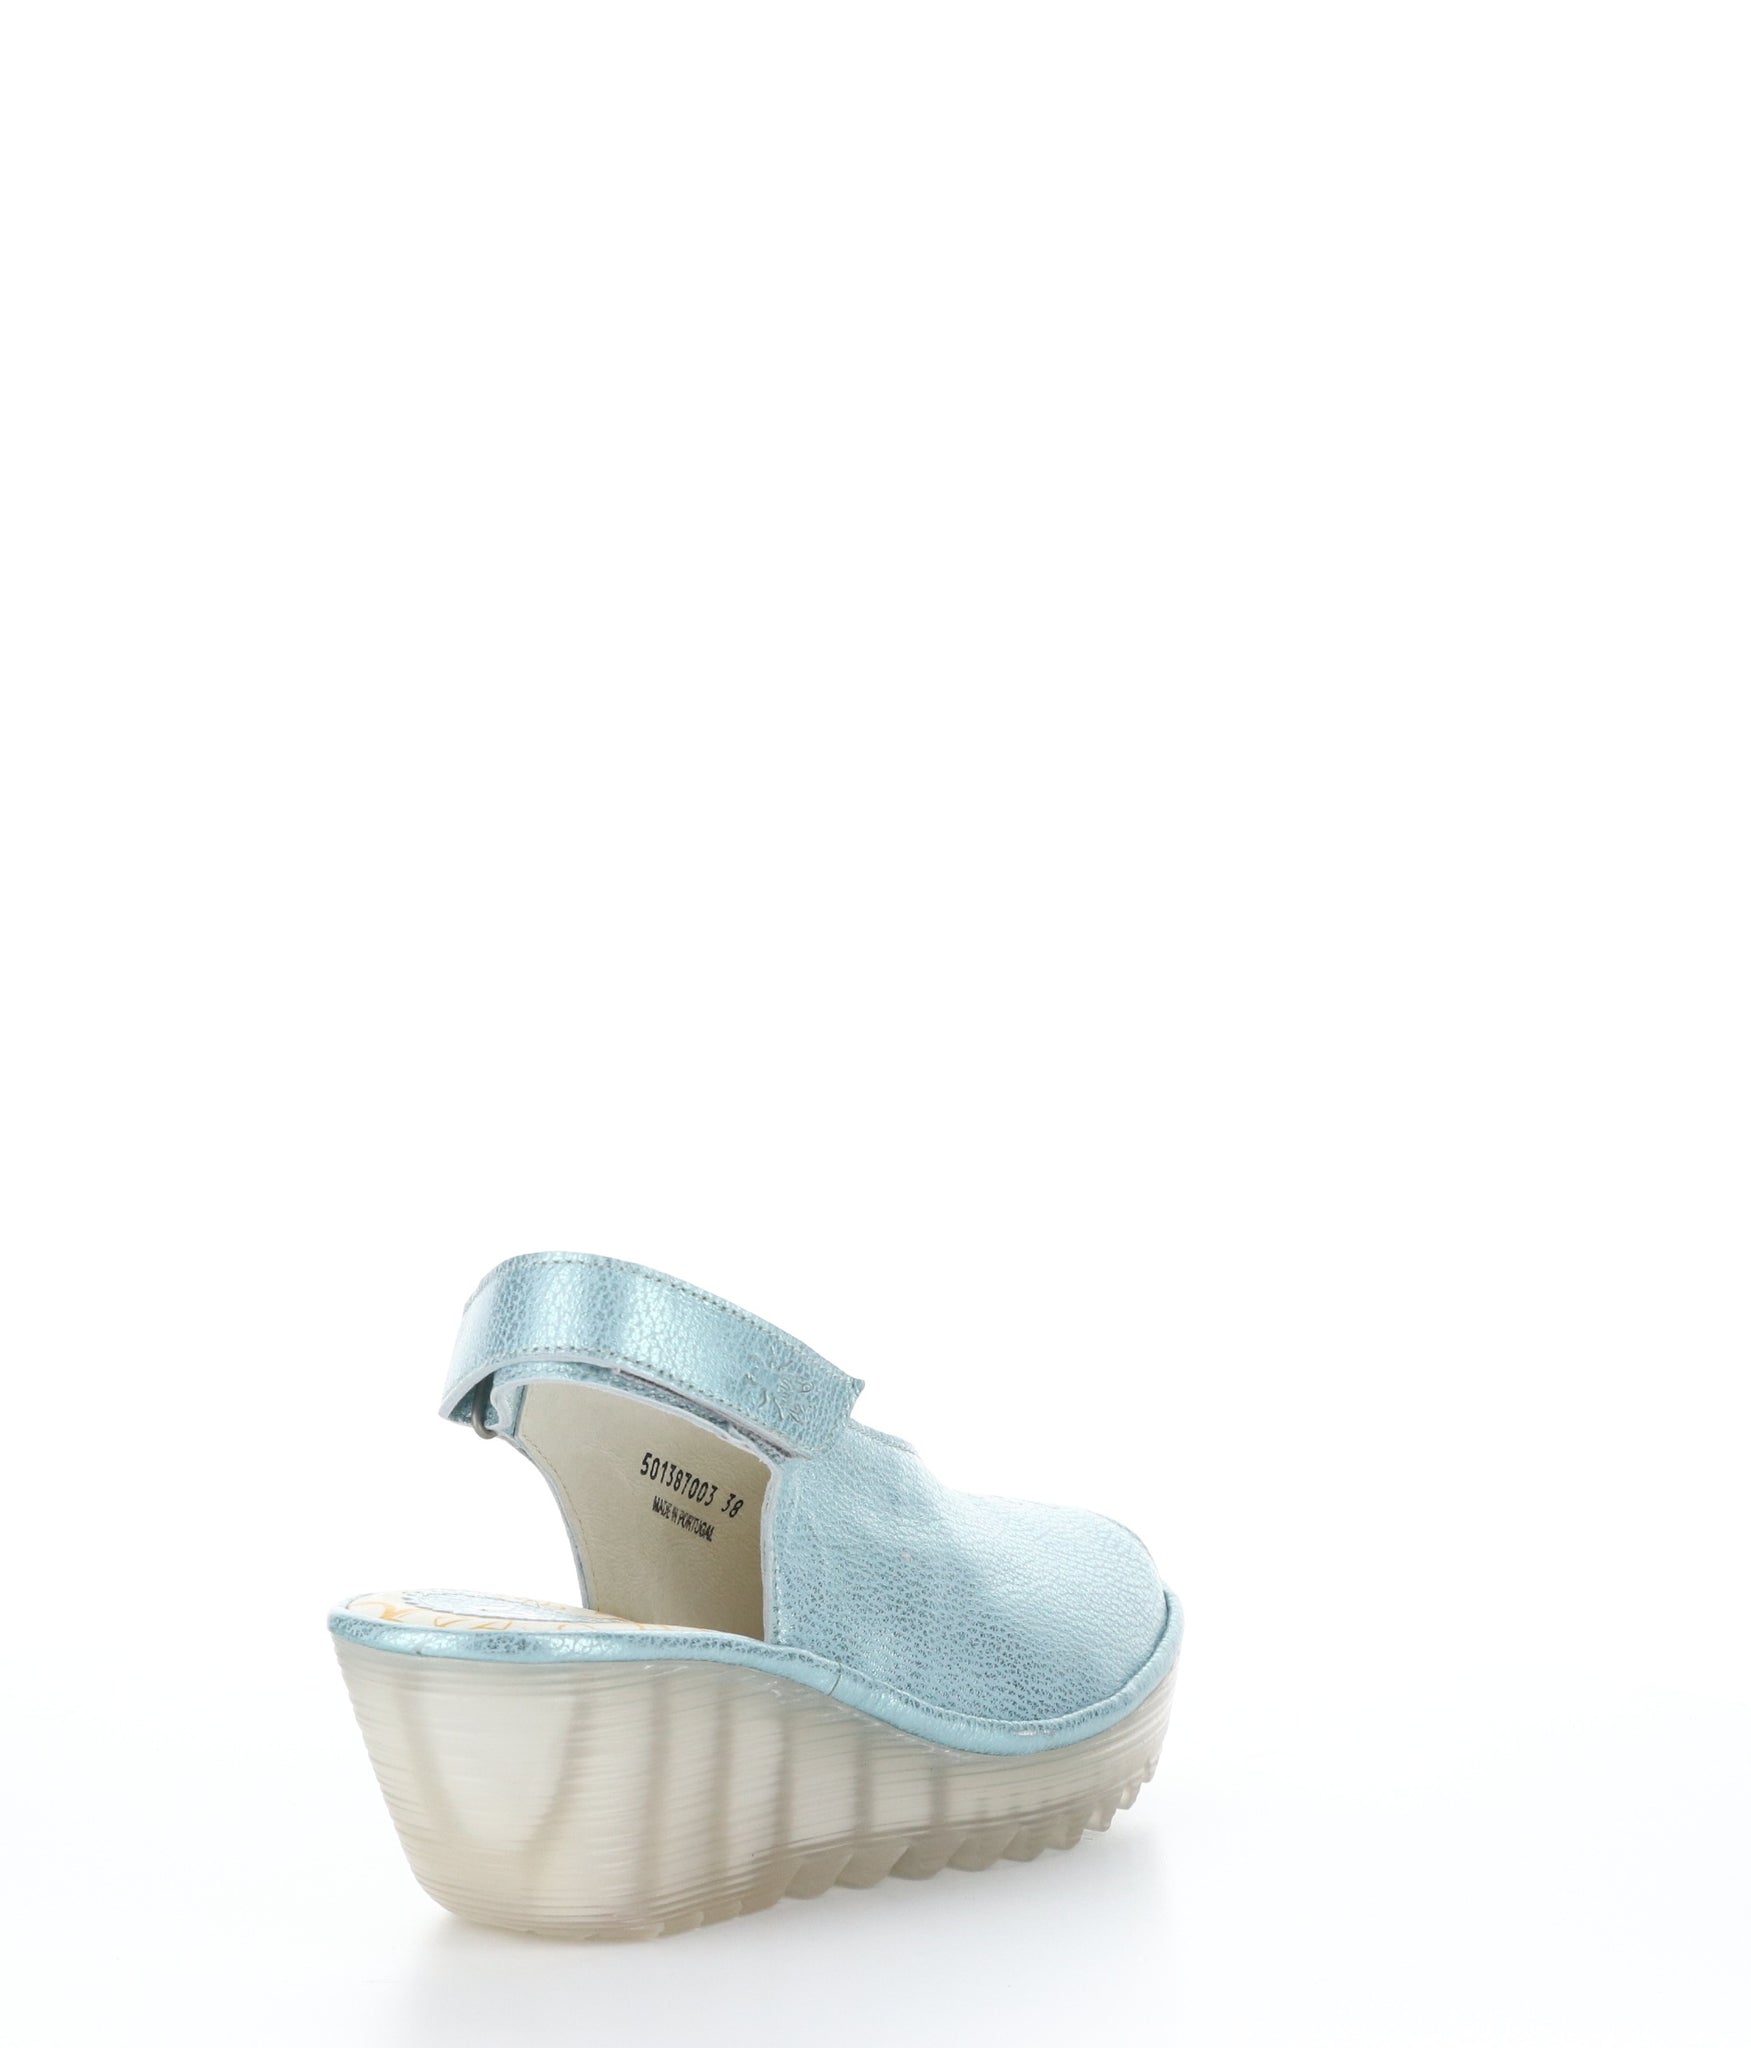 Fly London "YEAY" Blue Metallic Sandal with velcro strap